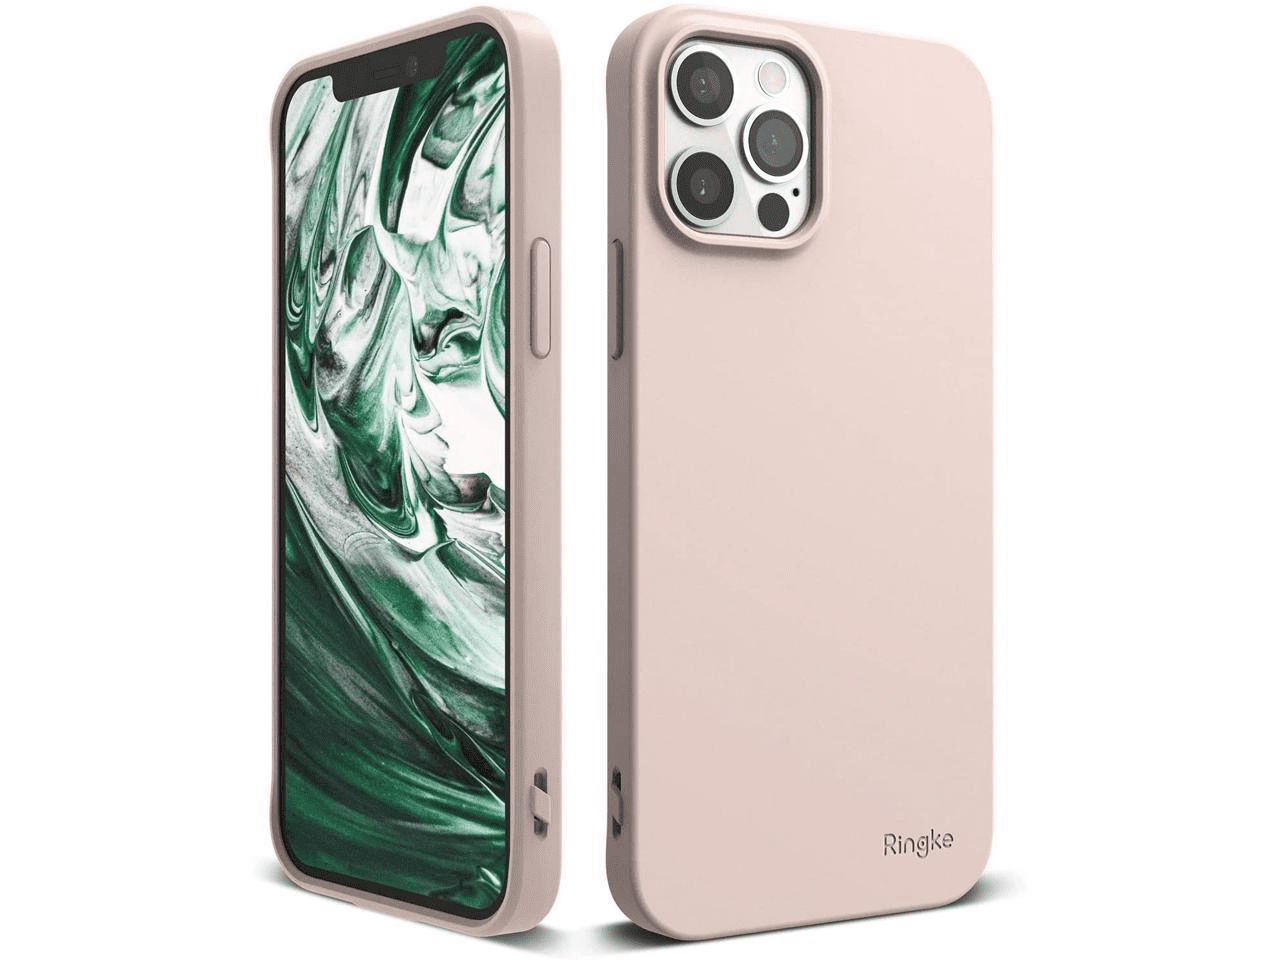 Ringke Iphone 12 Pro Max Case Air S Pink Sand In Pakistan At Fonepro